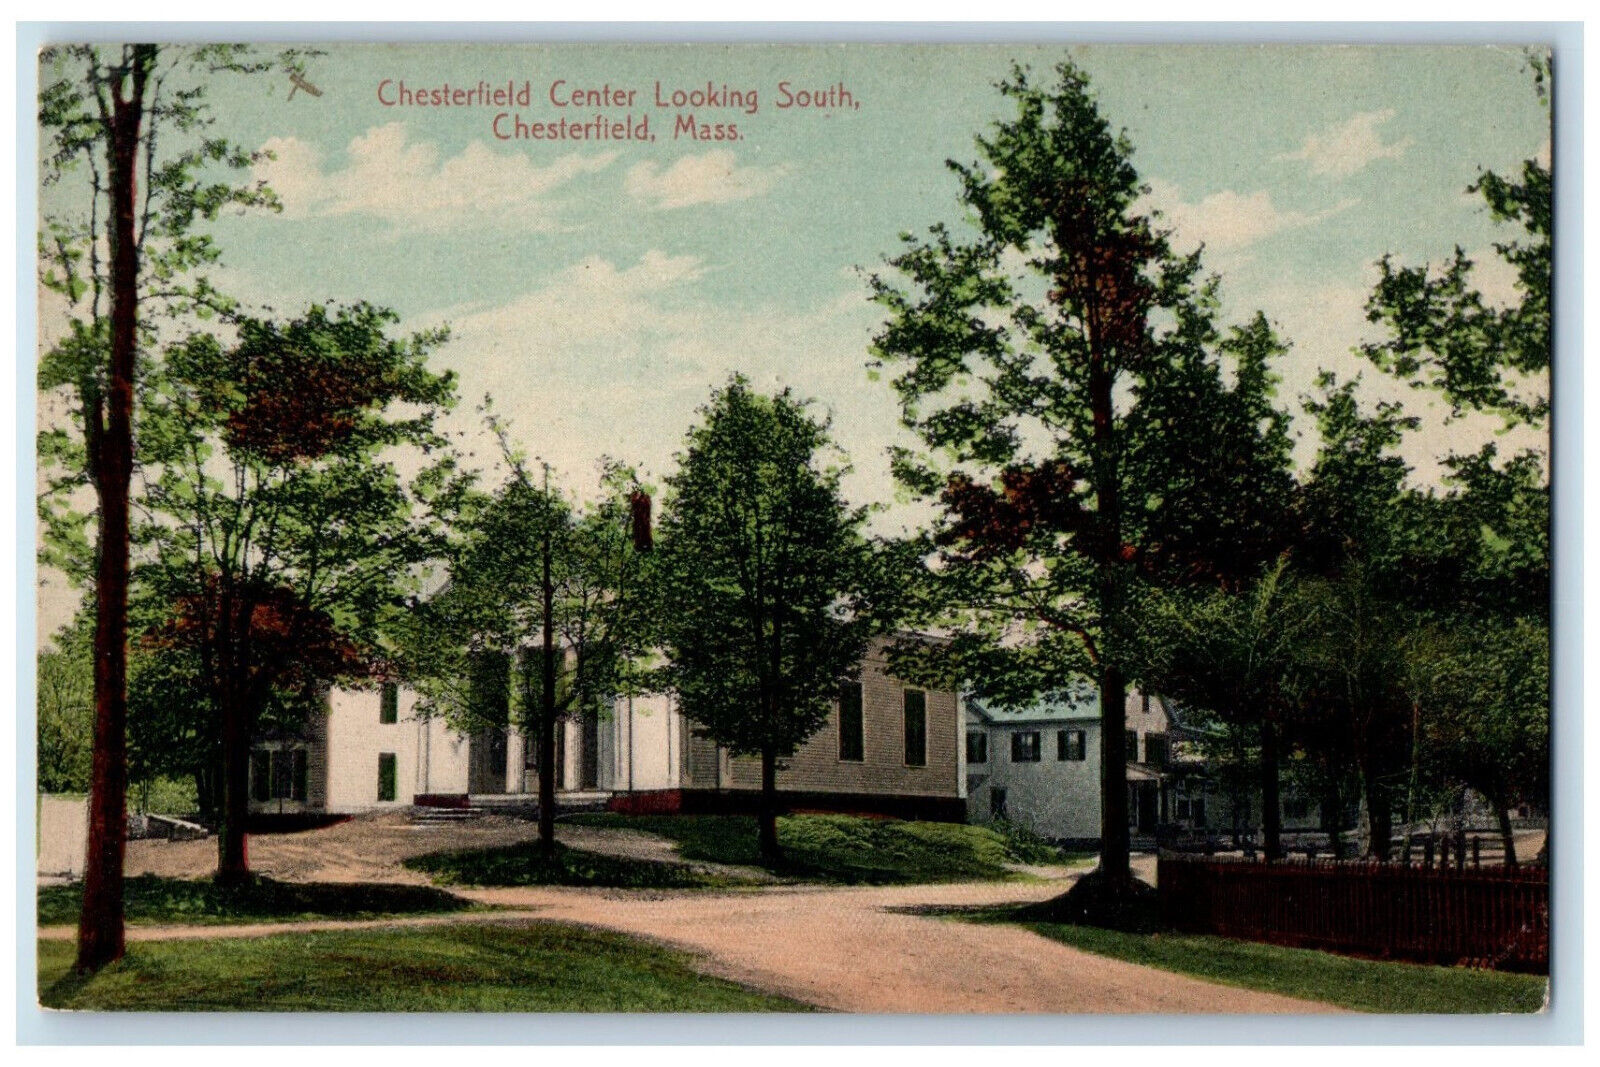 c1910 Chesterfield Center Looking South Chesterfield Massachusetts MA Postcard